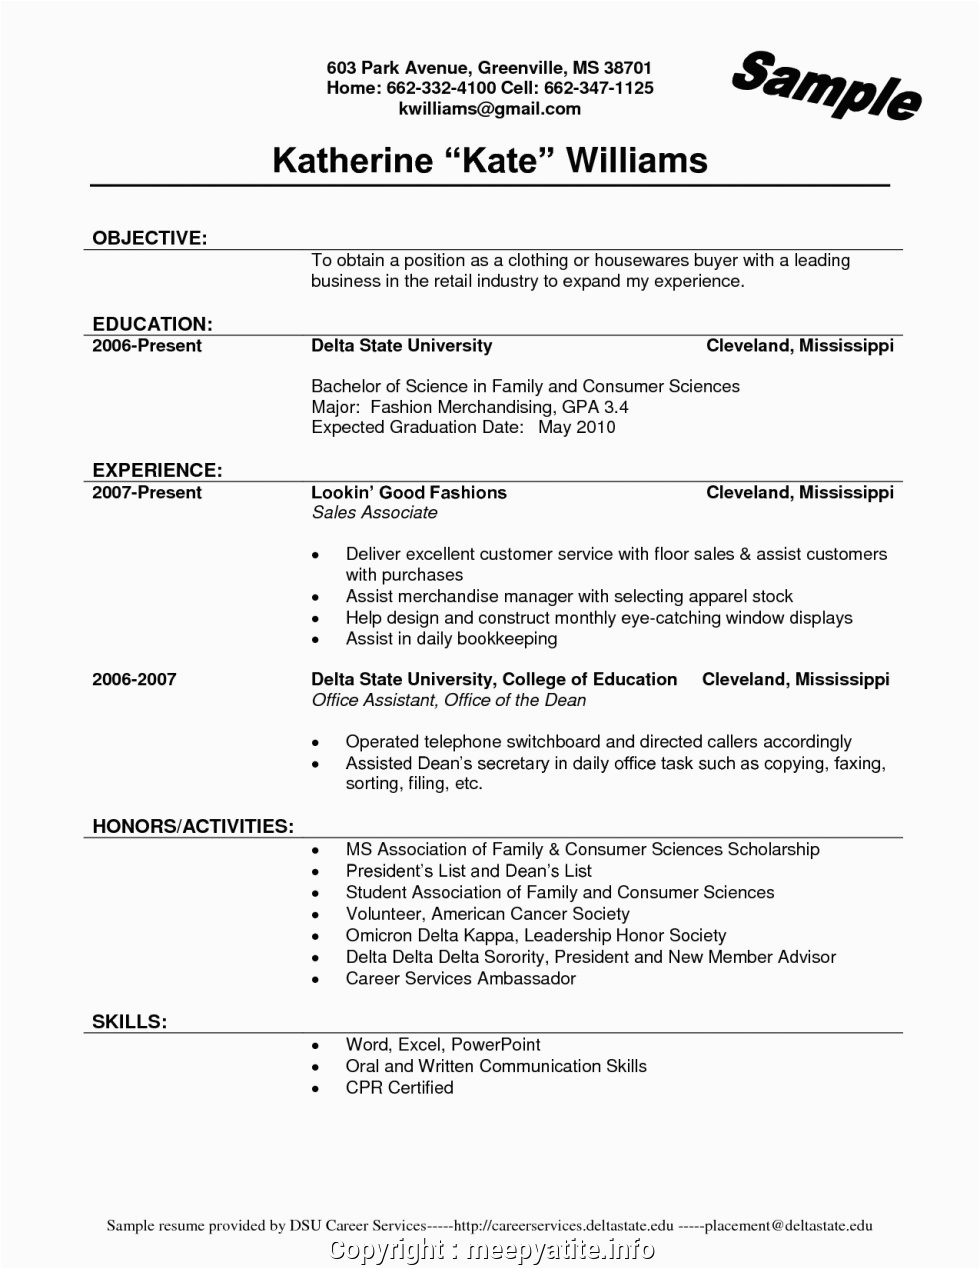 Sample Resume for Clothing Retail Sales associate Simply Fashion Retail Sales Resume Clothing Store Sales